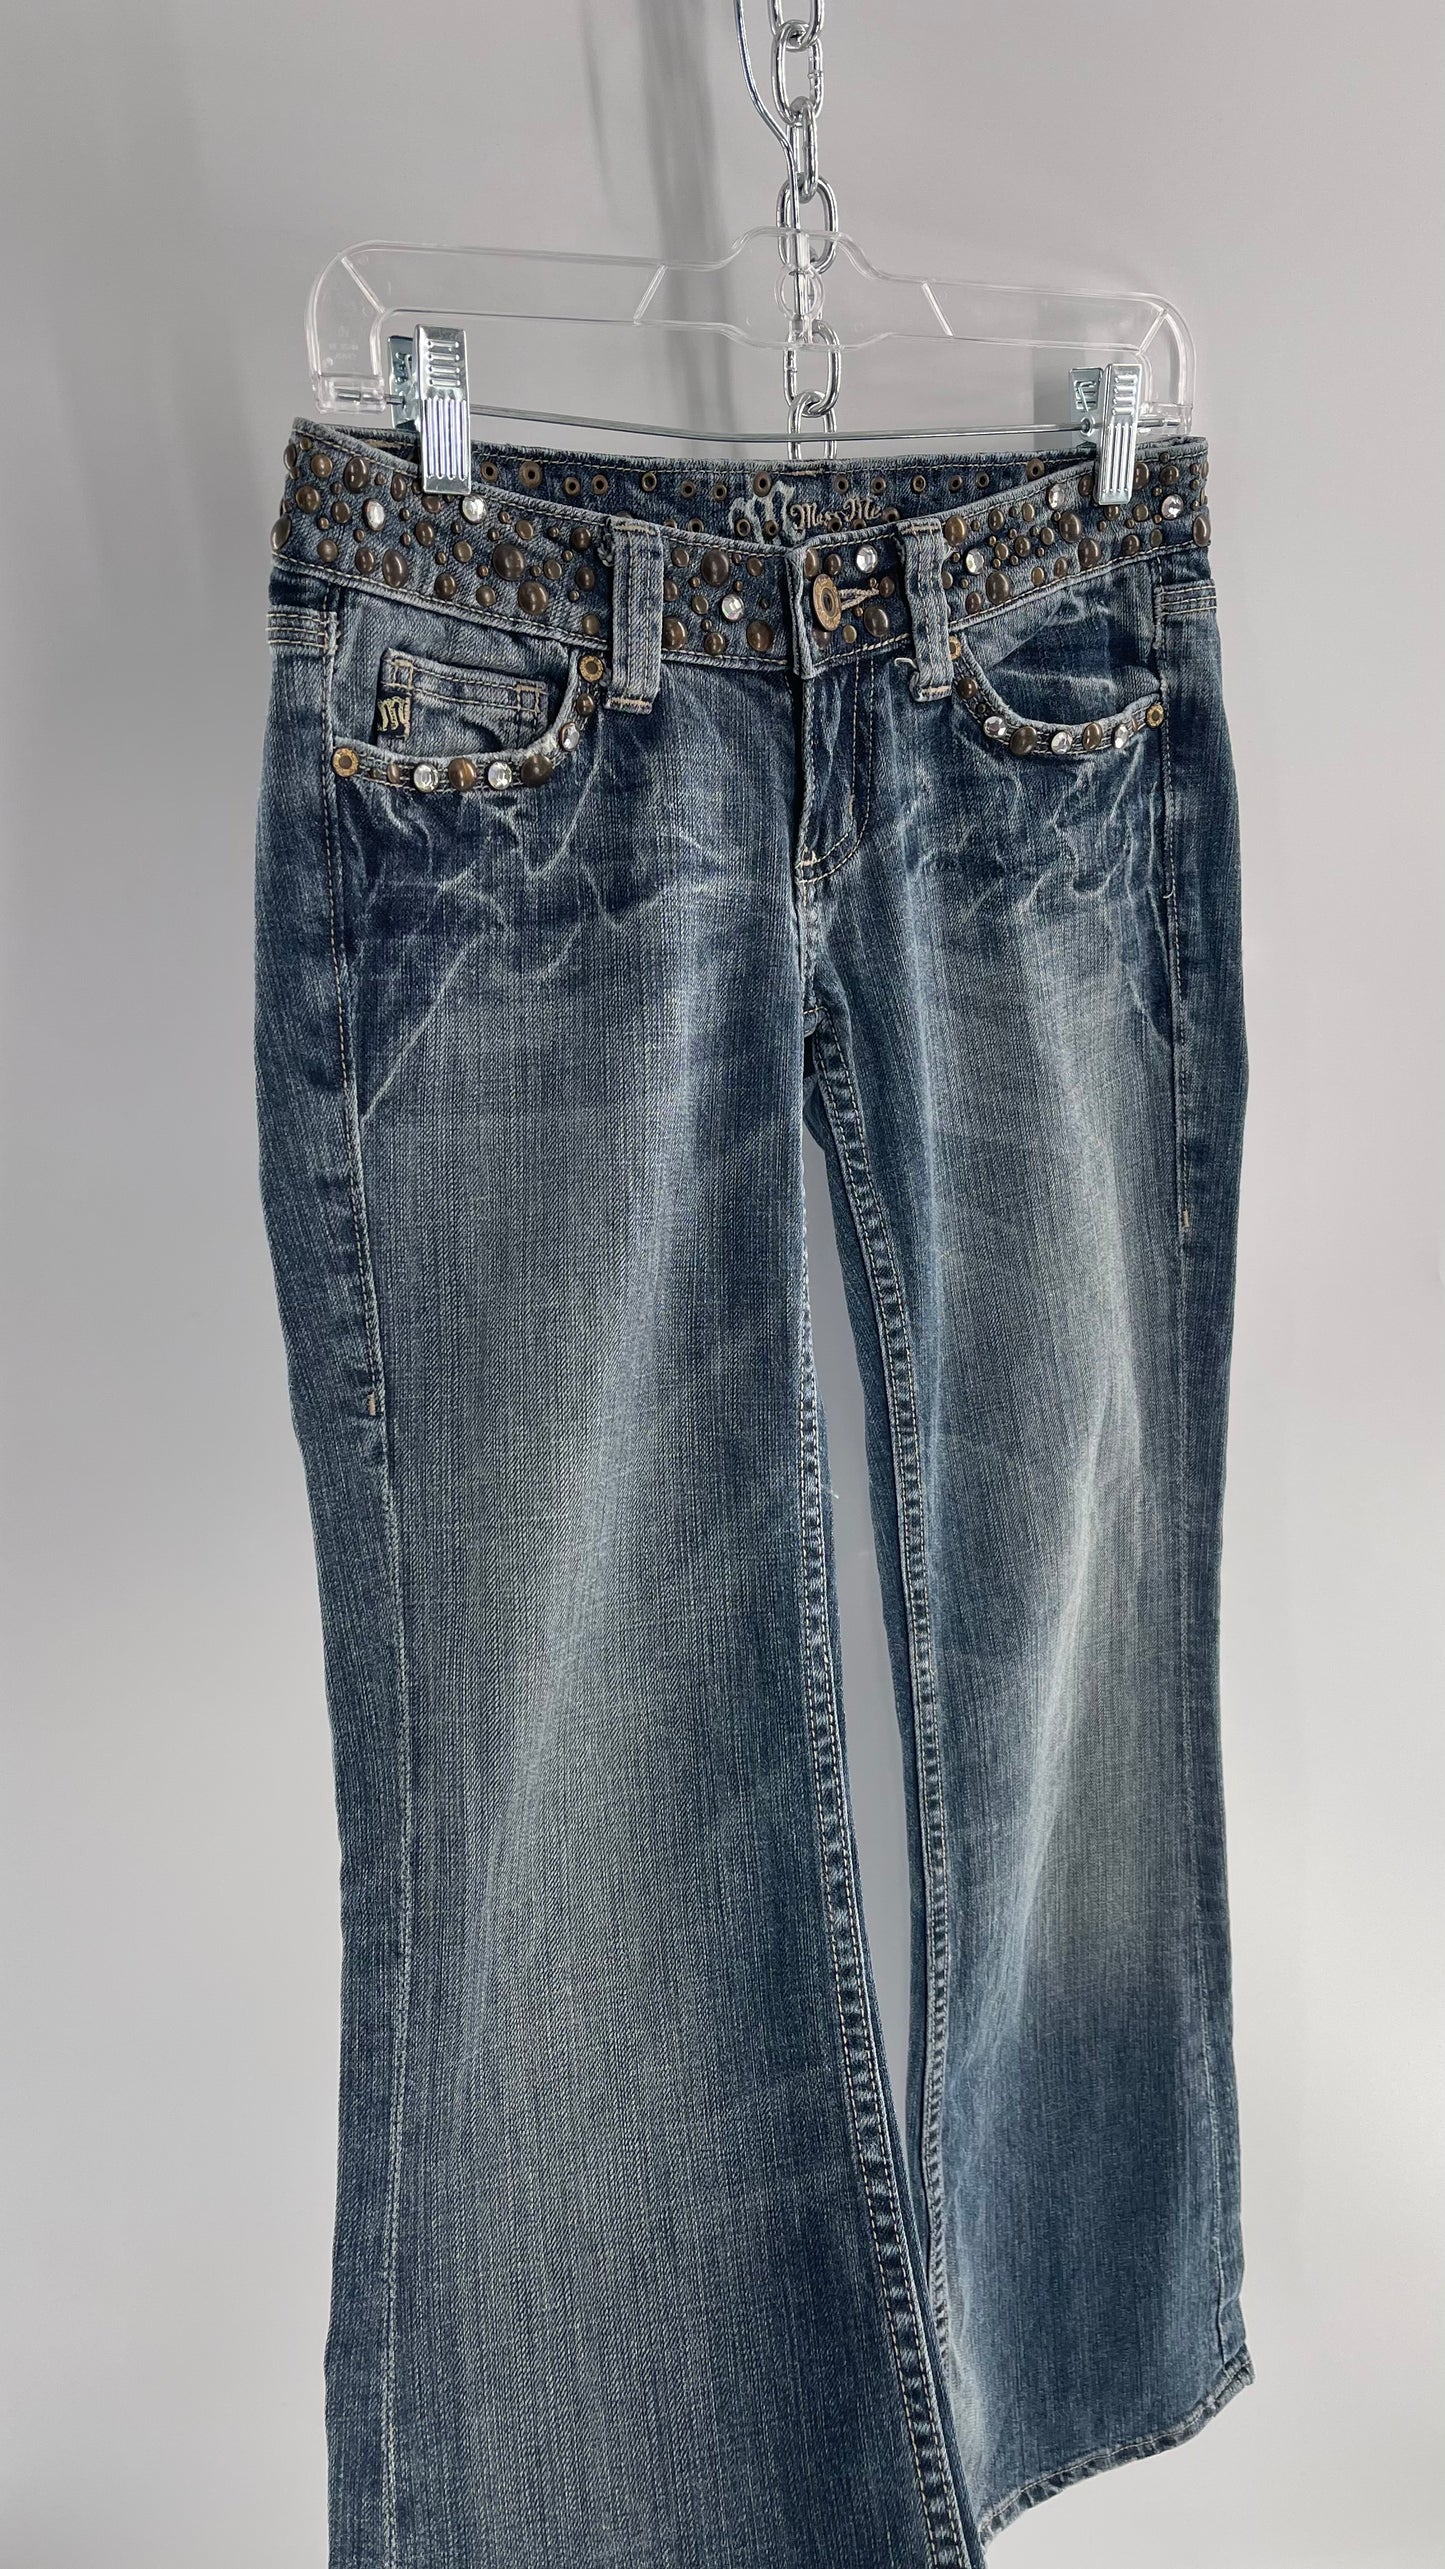 Vintage Miss Me Grainy Stone Wash Kick Flares with Studded Low Waist and Back Pockets (26)